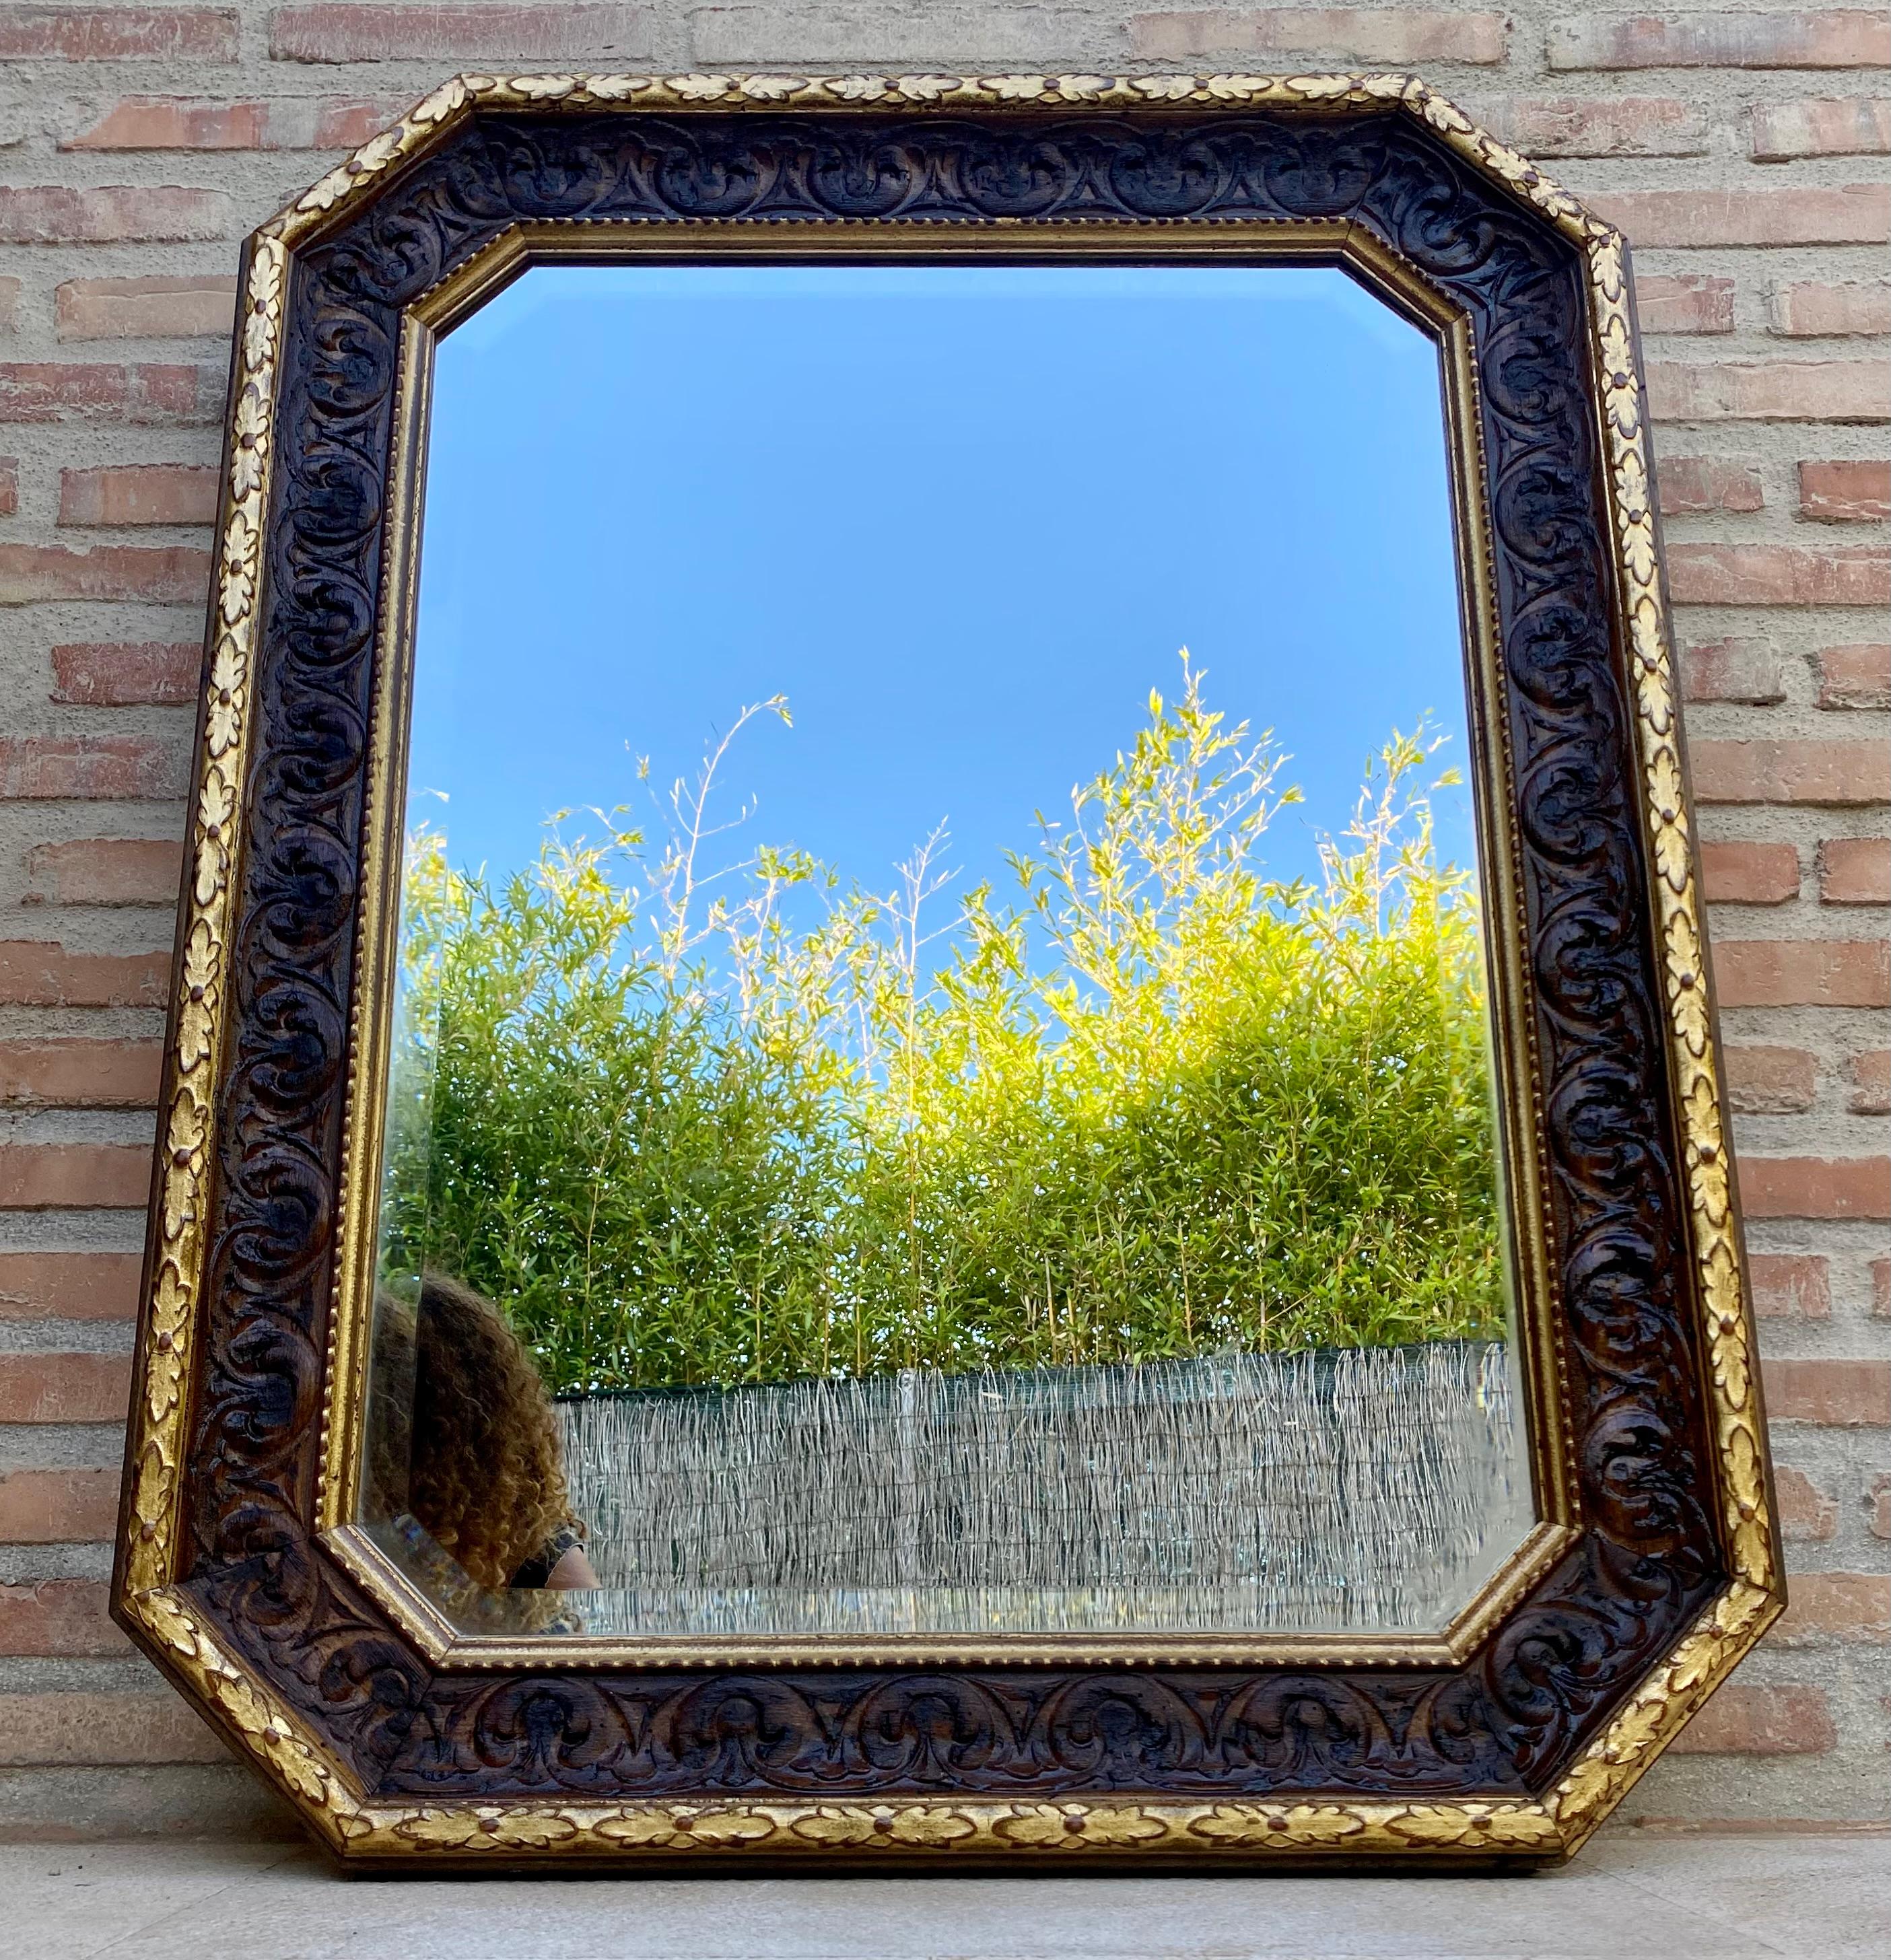 Octogonal Wall Mirror with Carved Gold Wooden Frame, 1940´s.
Its octagonal shape makes this mirror a unique piece.
Its frame is fully carved, which gives grandeur to this precious piece from the 40s.